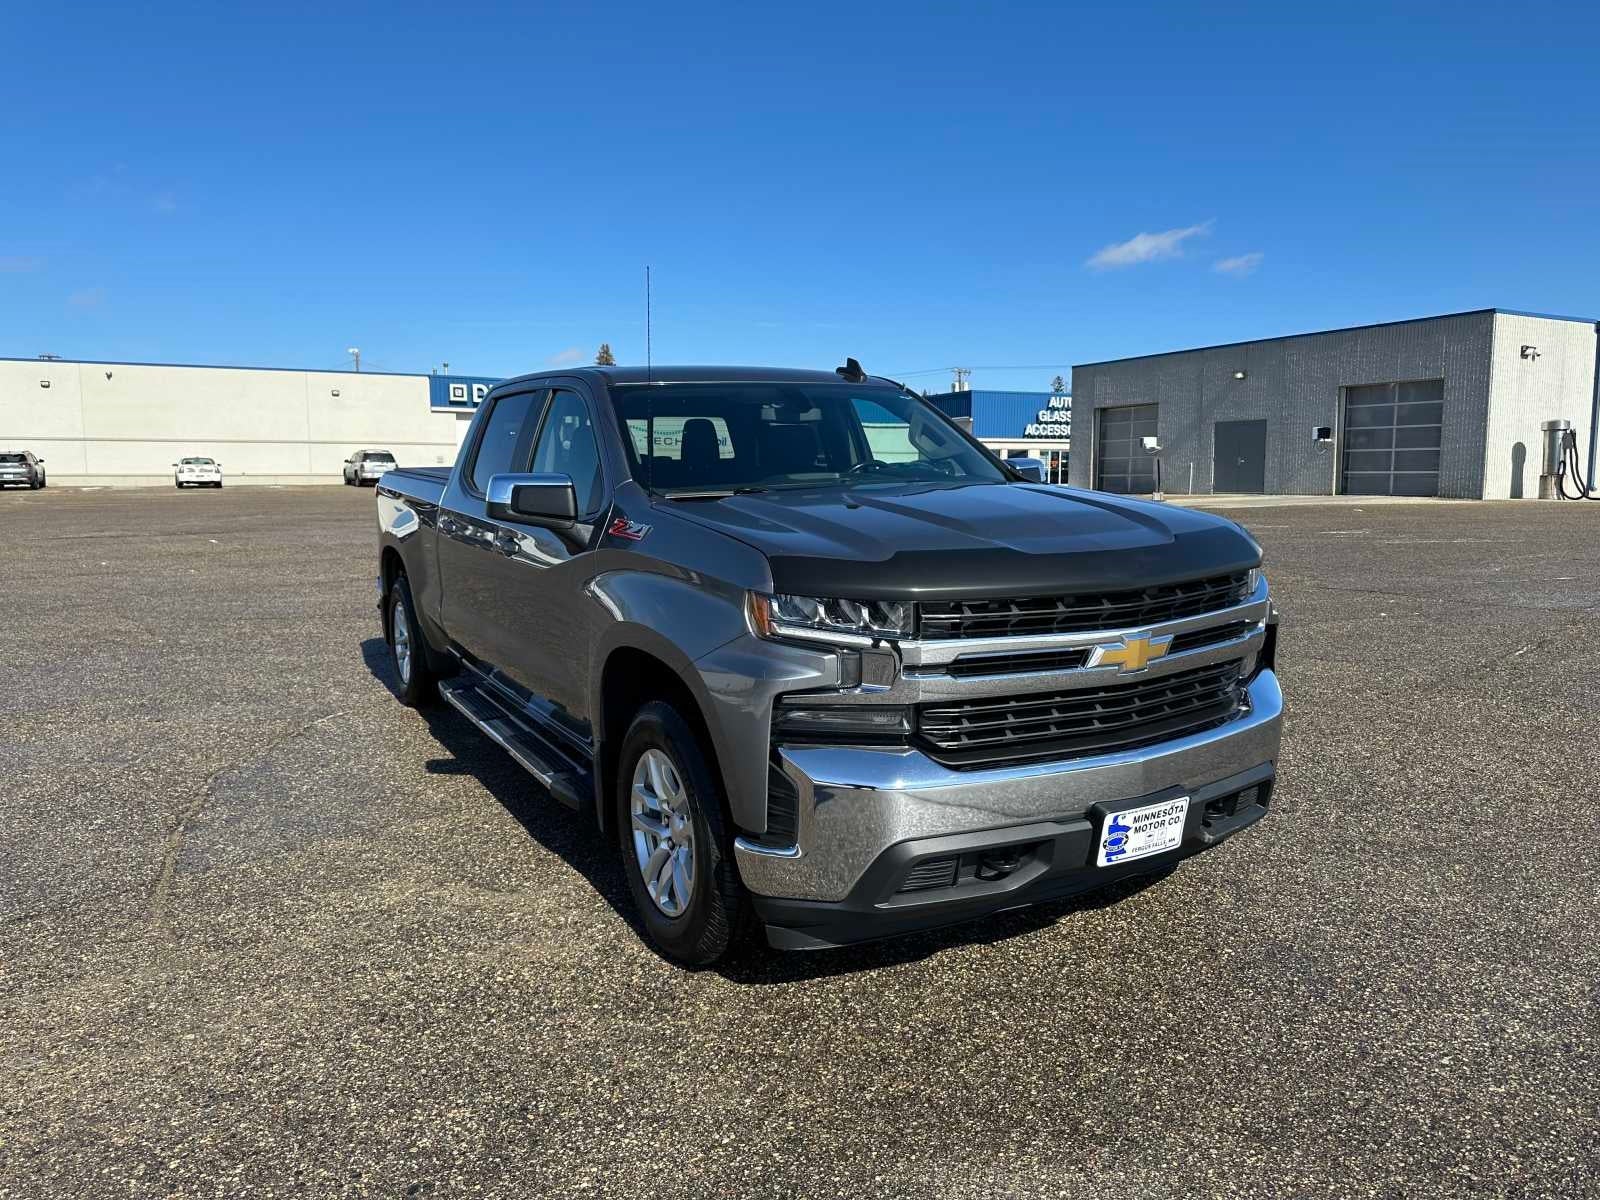 Used 2020 Chevrolet Silverado 1500 LT with VIN 3GCUYDED0LG313708 for sale in Fergus Falls, Minnesota